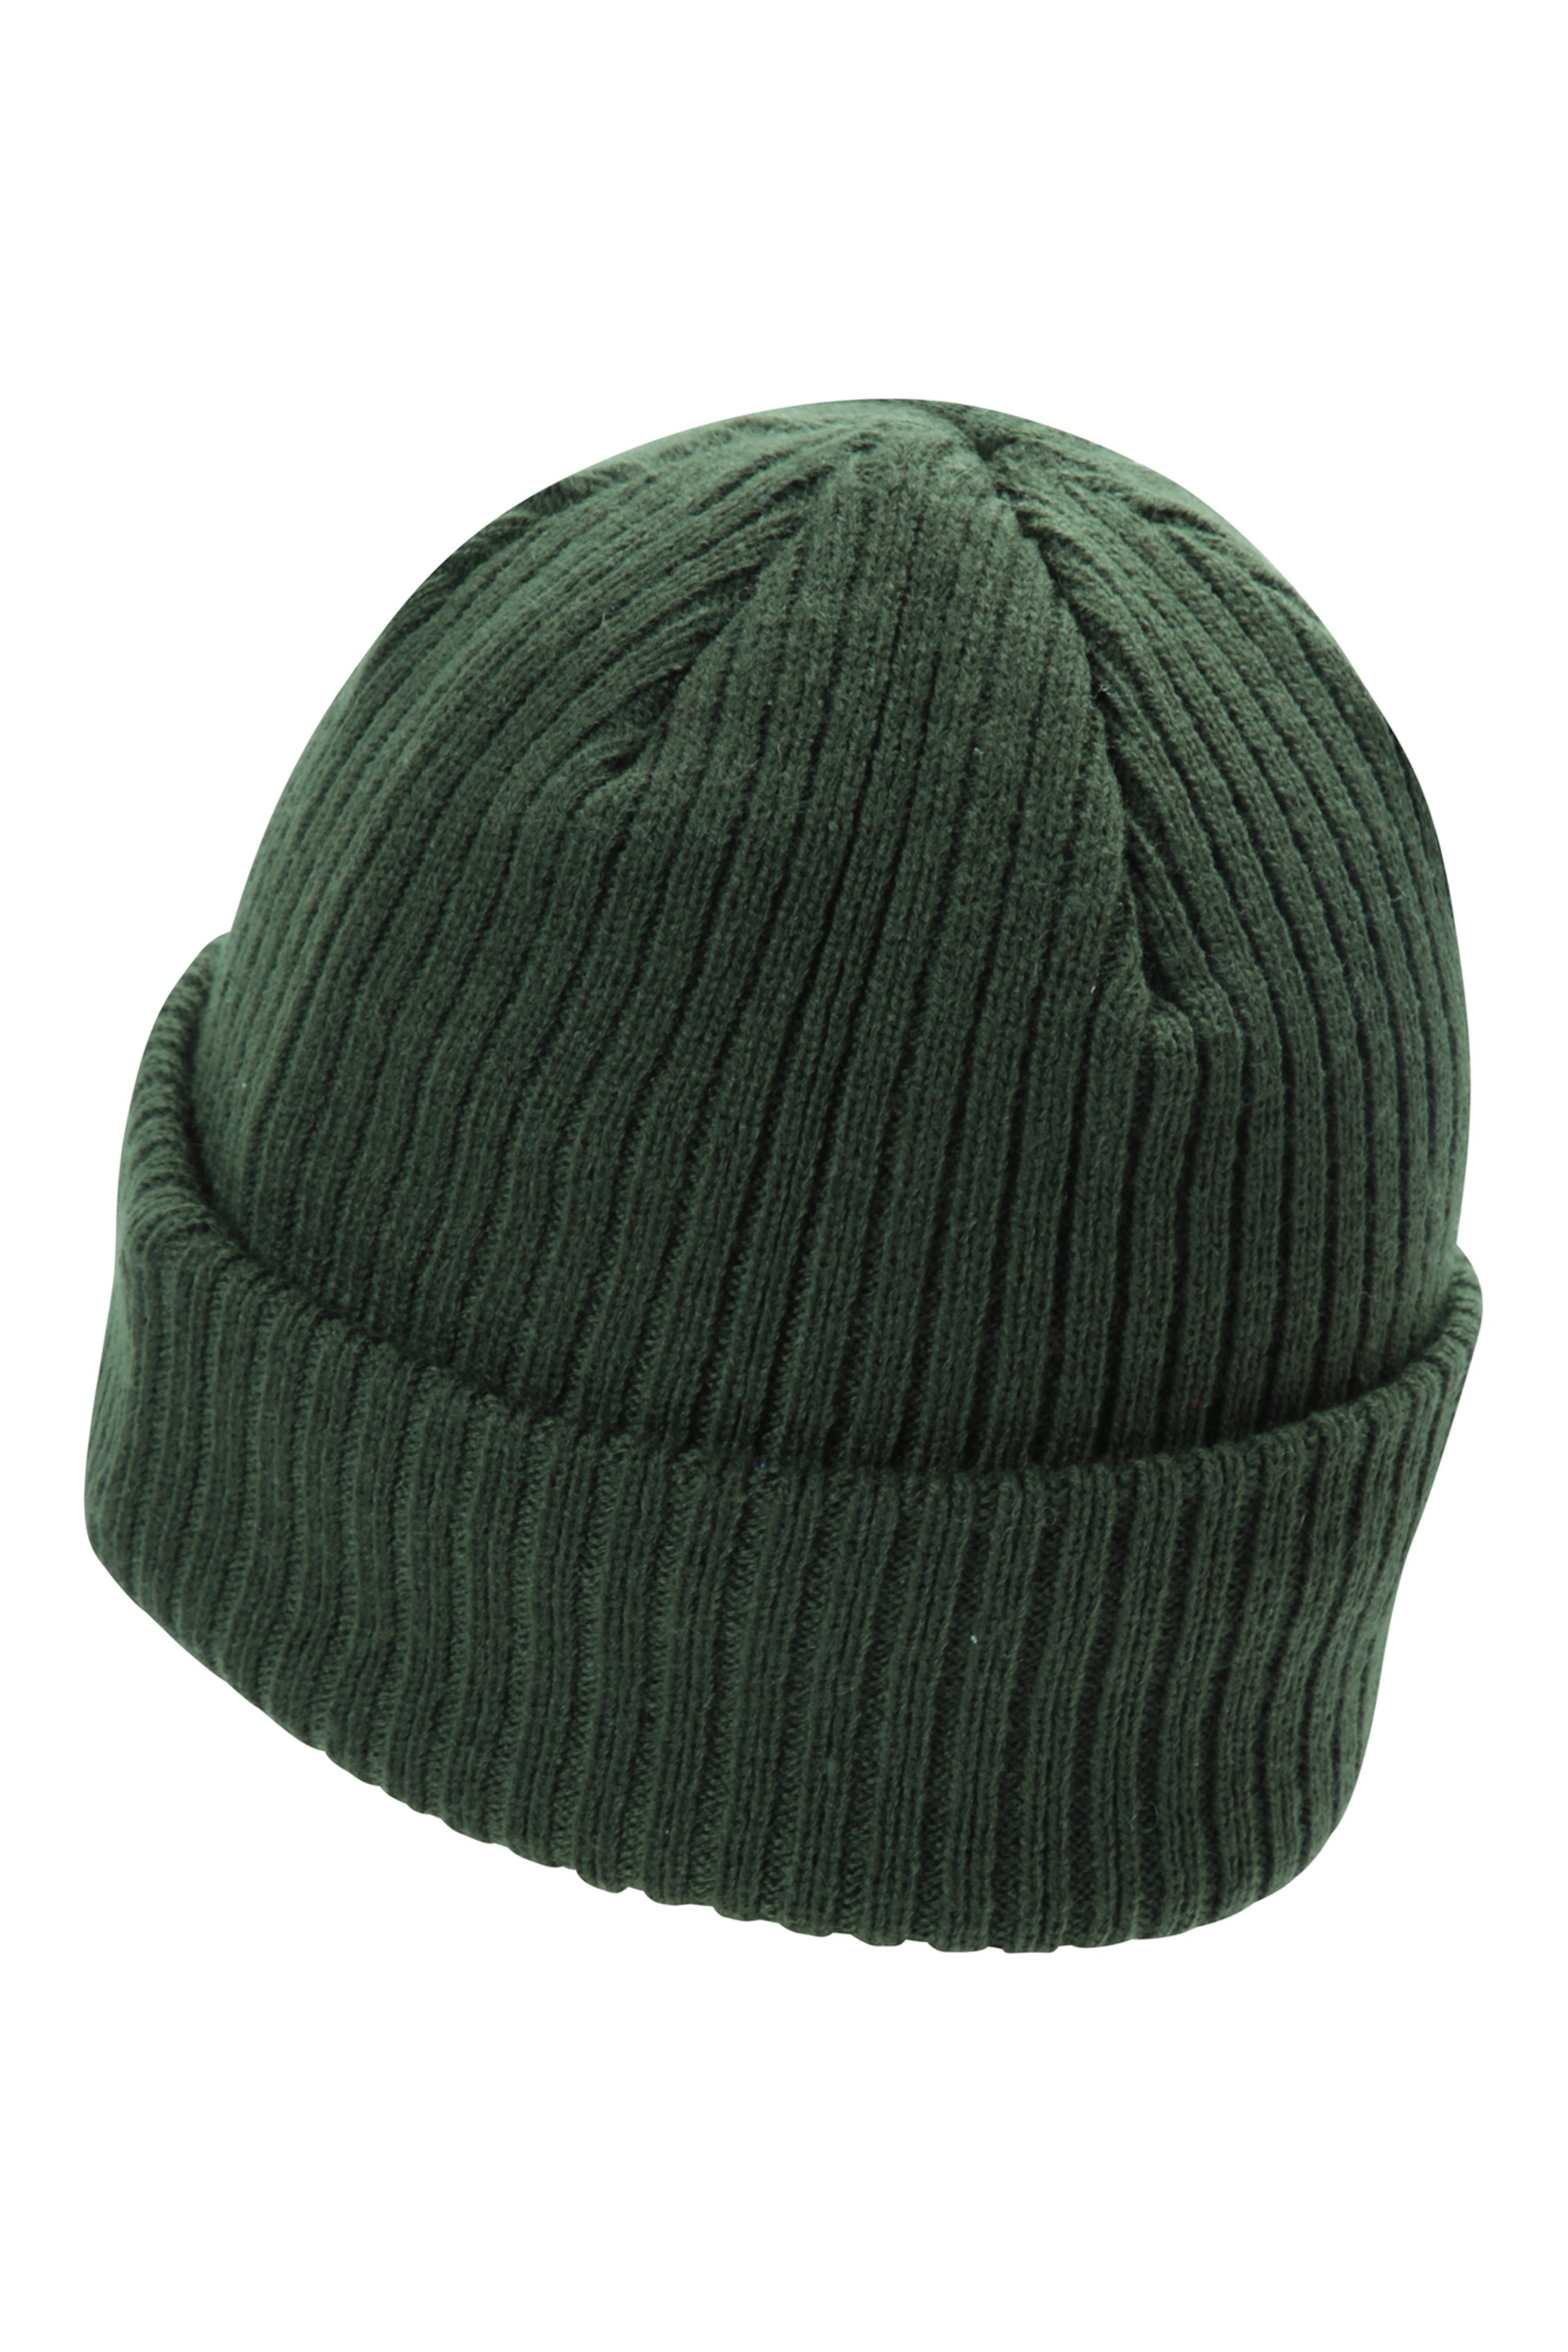 Mountain Warehouse Mens Winter Hats with Double Lined & Knitted Effect One Size 